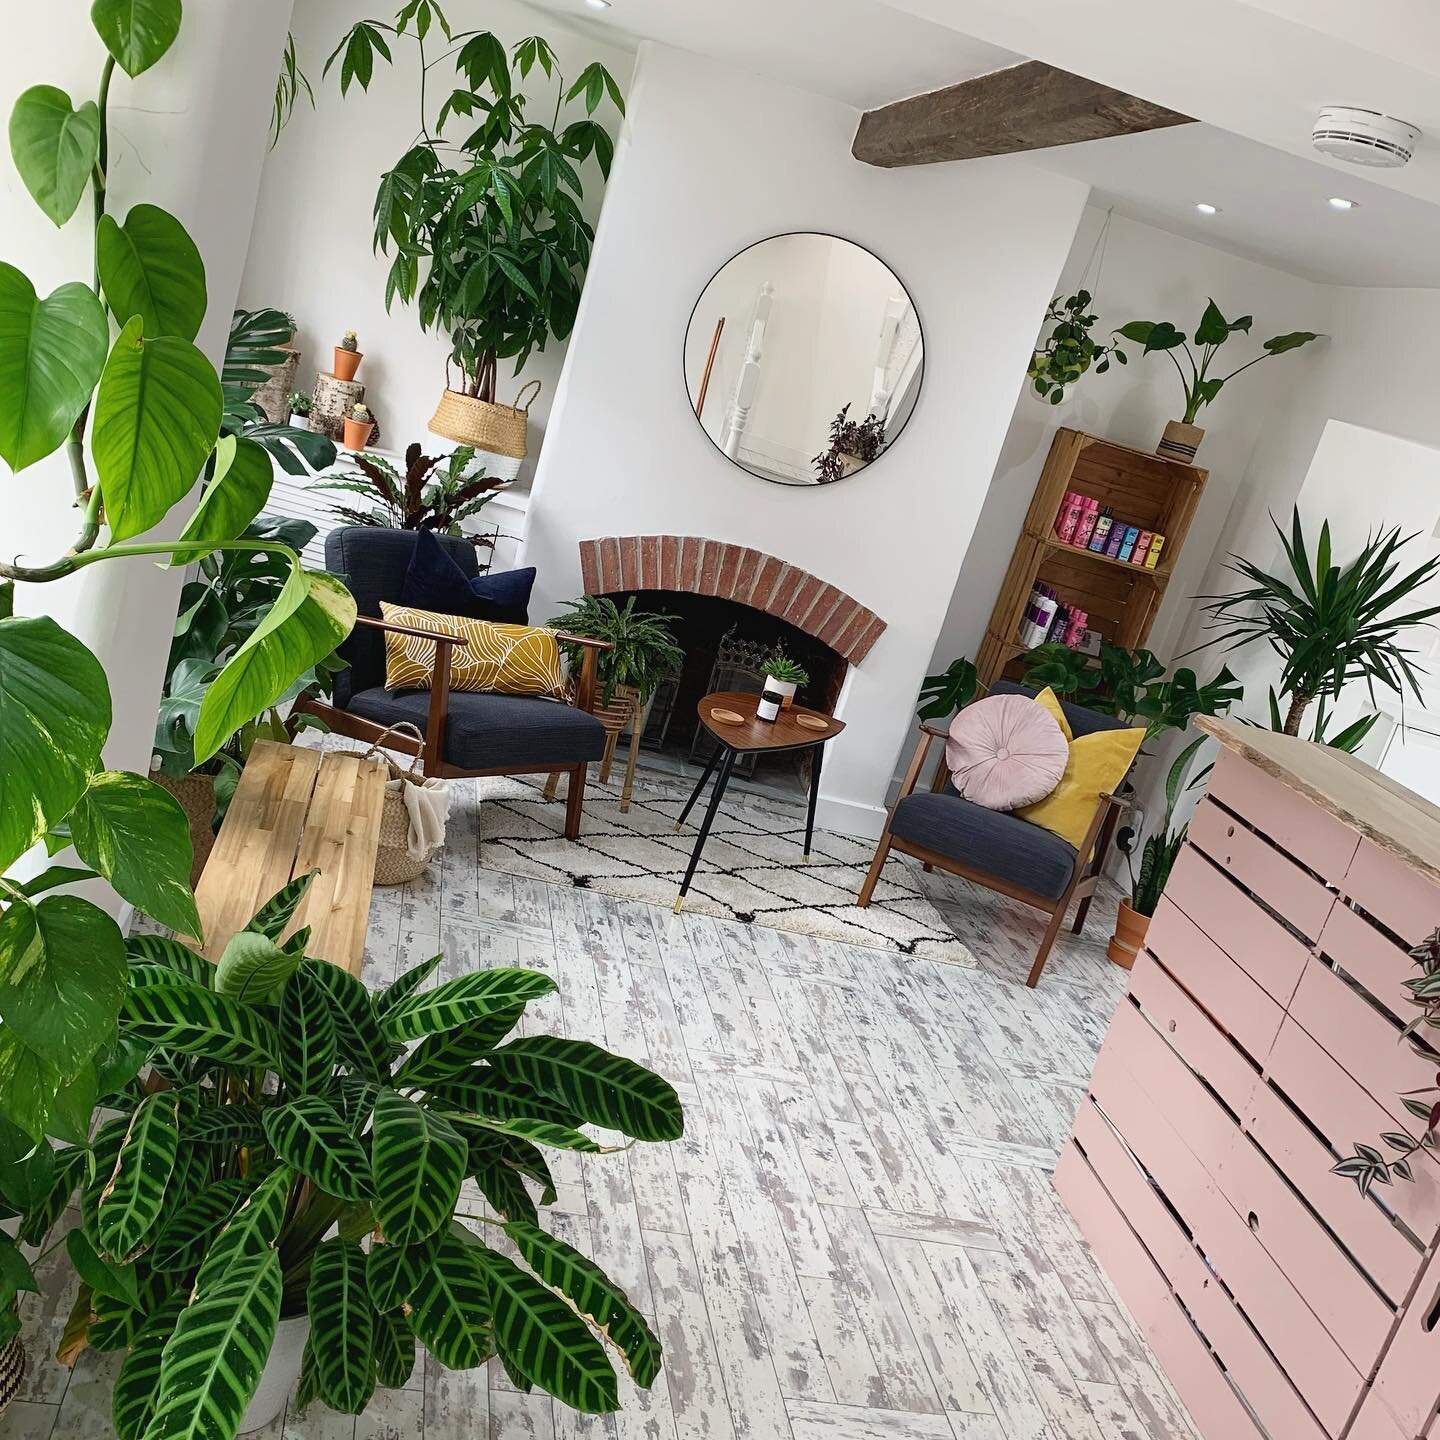 It might be work, but it&rsquo;s our favourite place to be 🪴
Did you know - plants promote feelings of happiness, calm &amp; relaxation, teamed with some beautiful hair and good coffee our tiny jungle feels like a little hideaway 🍃